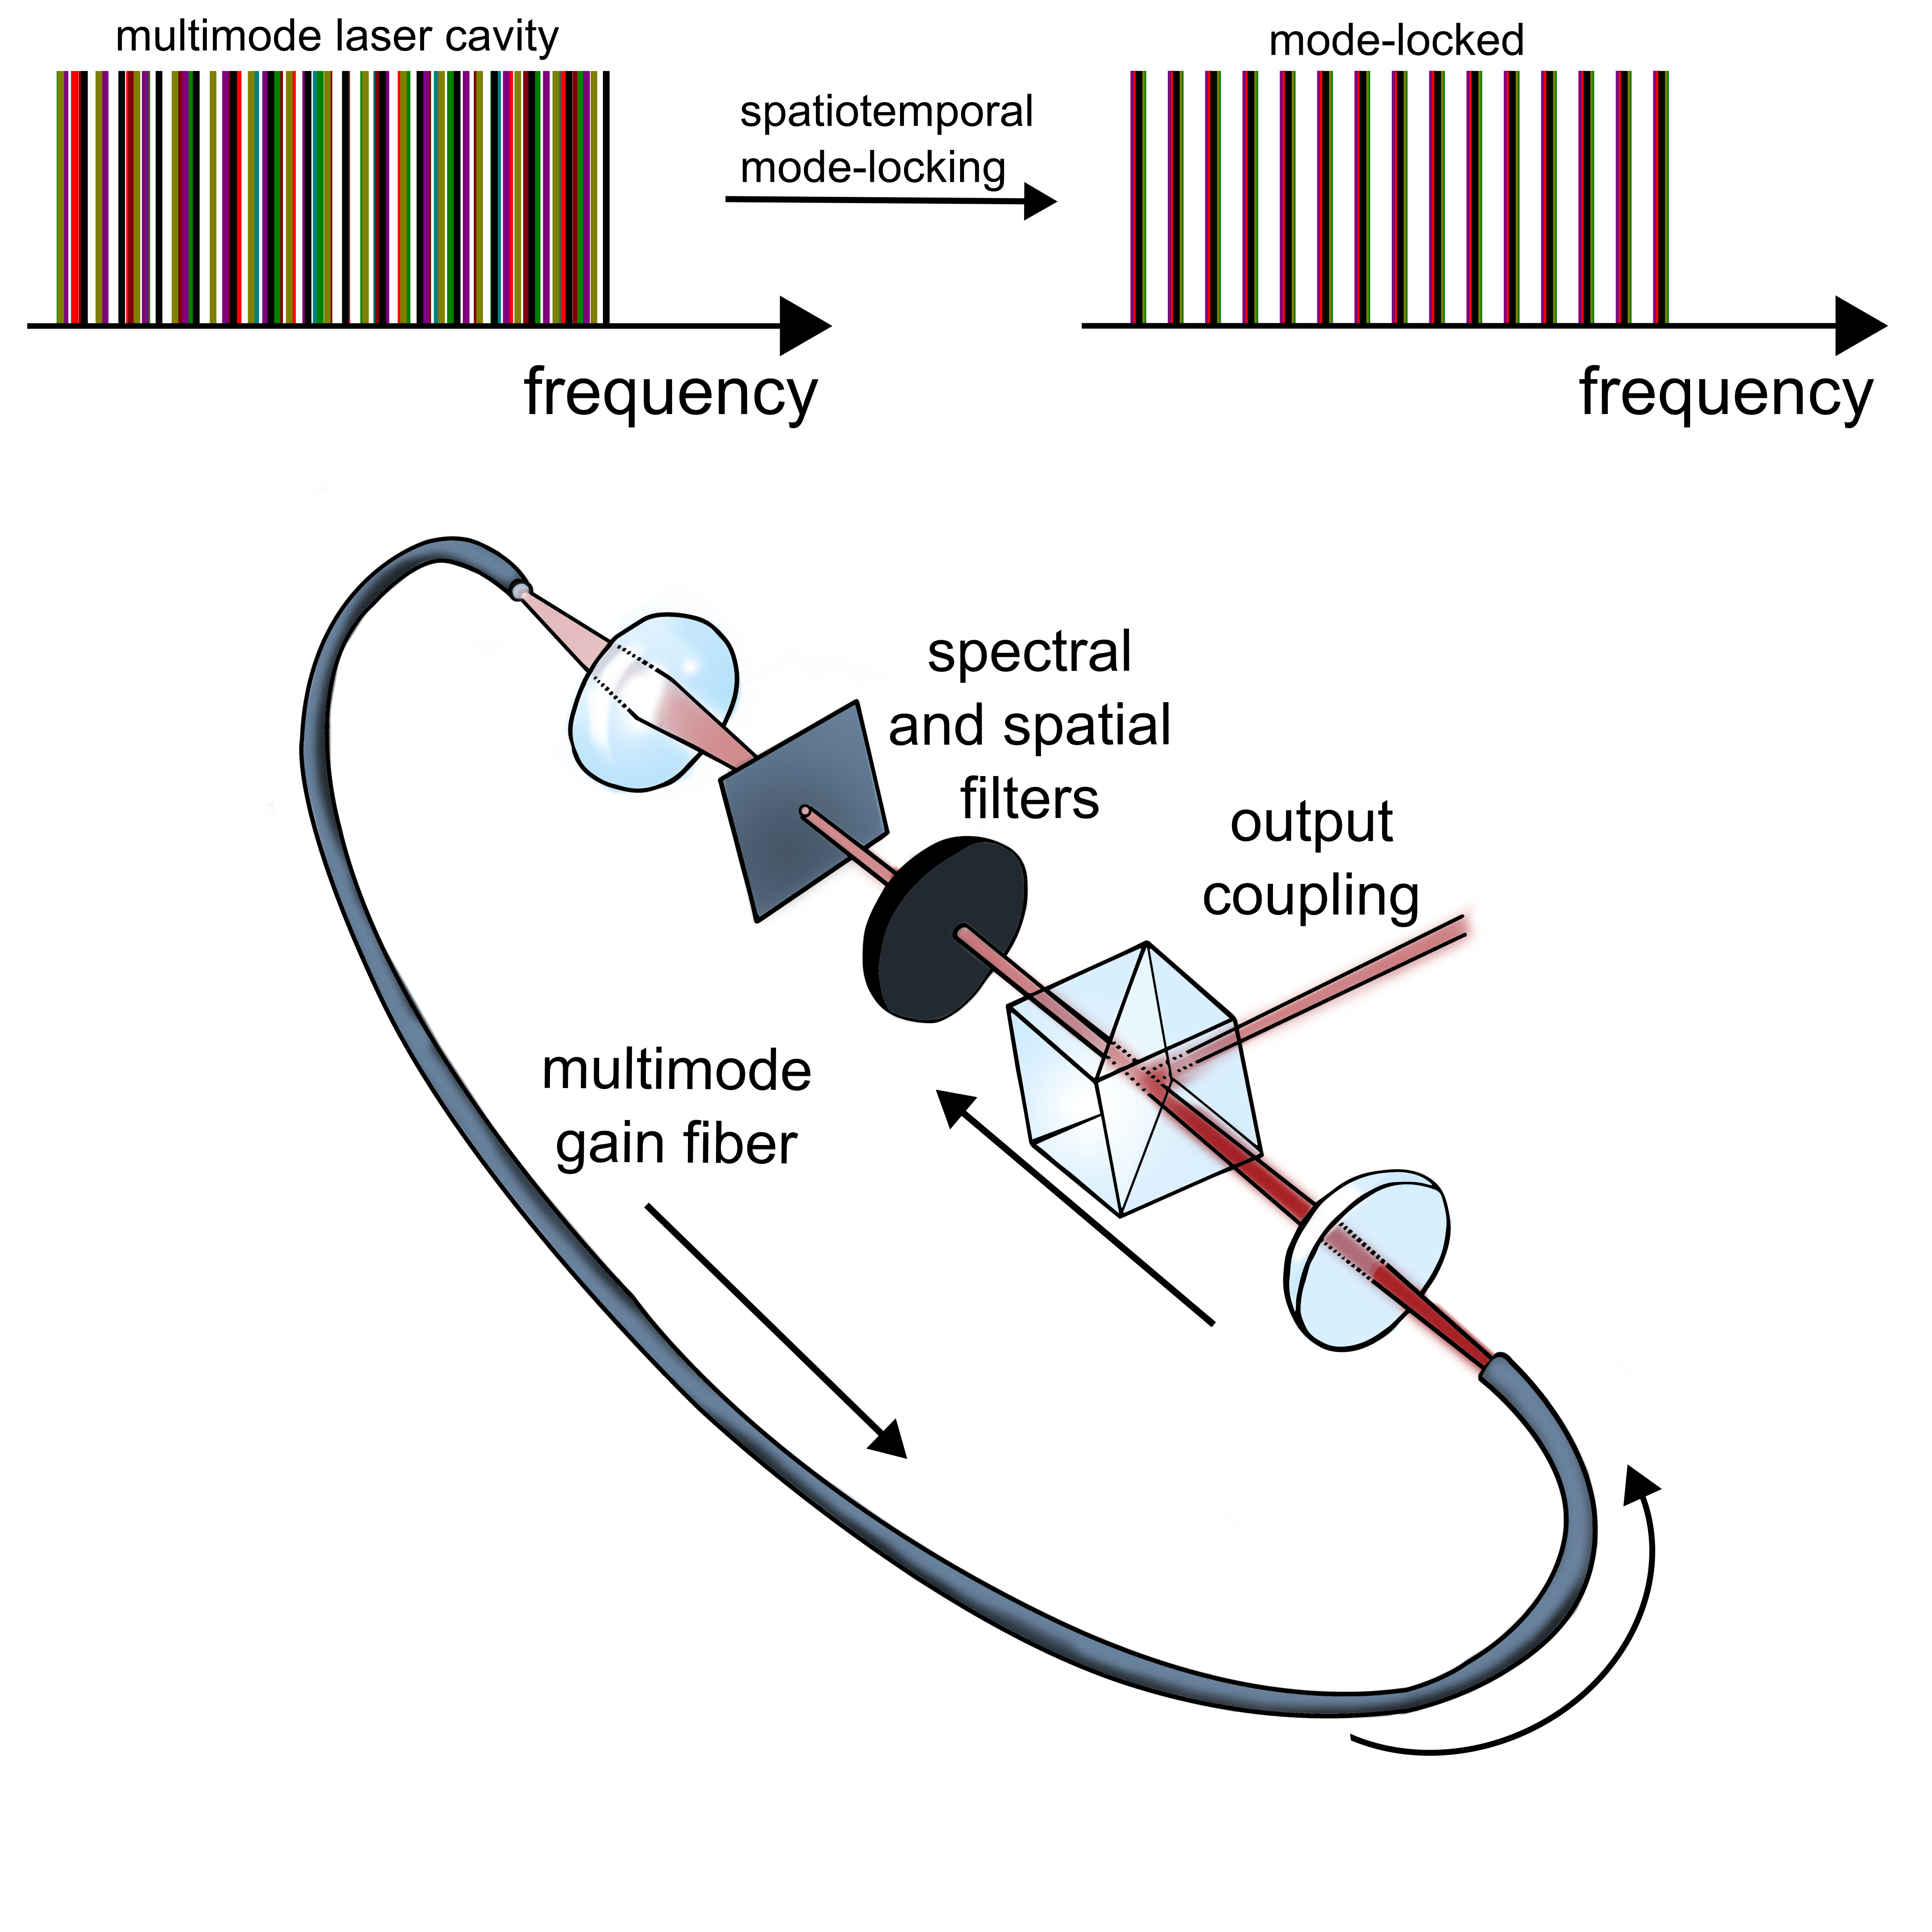 Simple depiction of spatiotemporal mode-locking